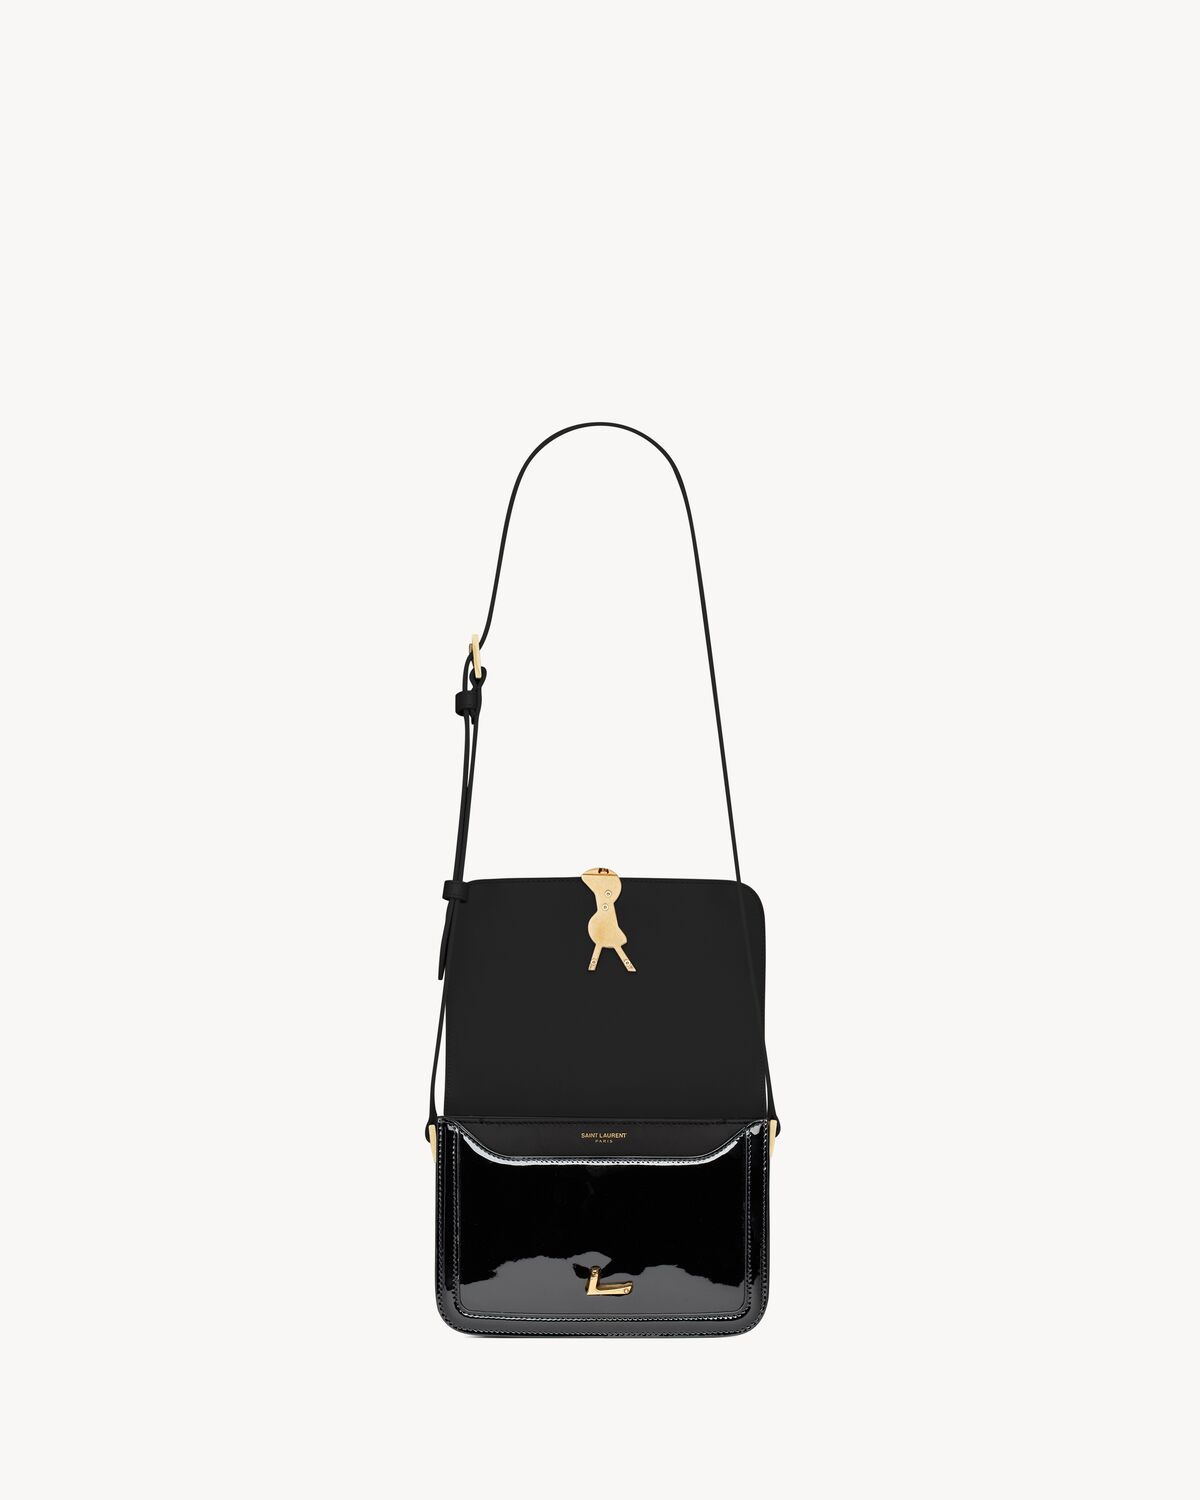 Solferino small satchel in lacquered patent leather